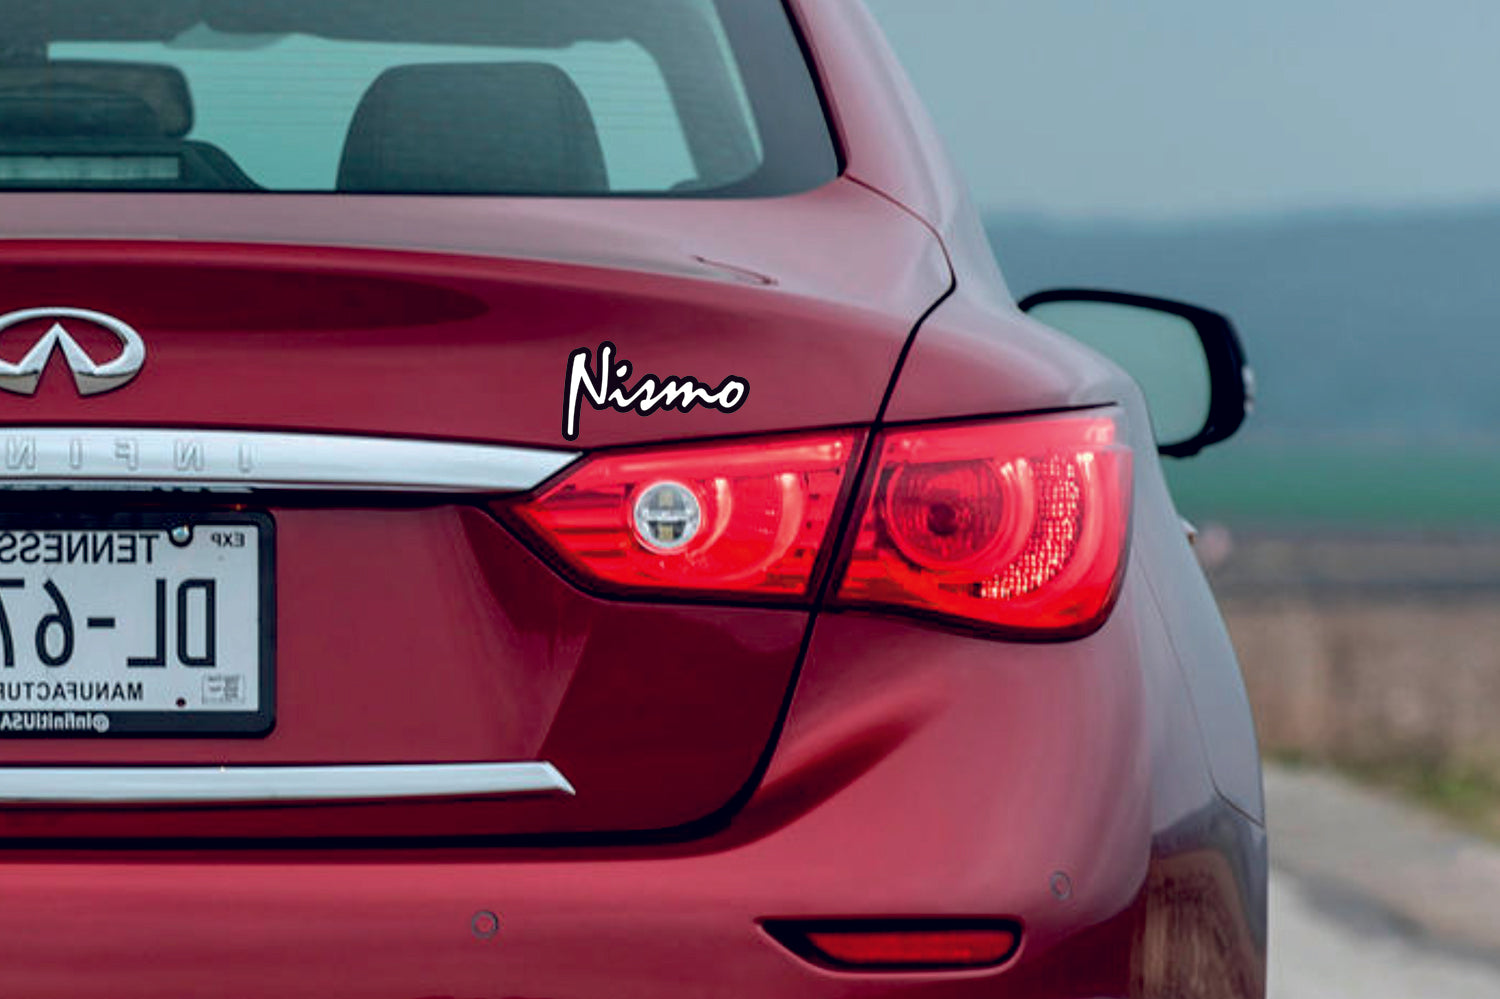 Infiniti tailgate trunk rear emblem with Nismo logo (Type 2) - decoinfabric